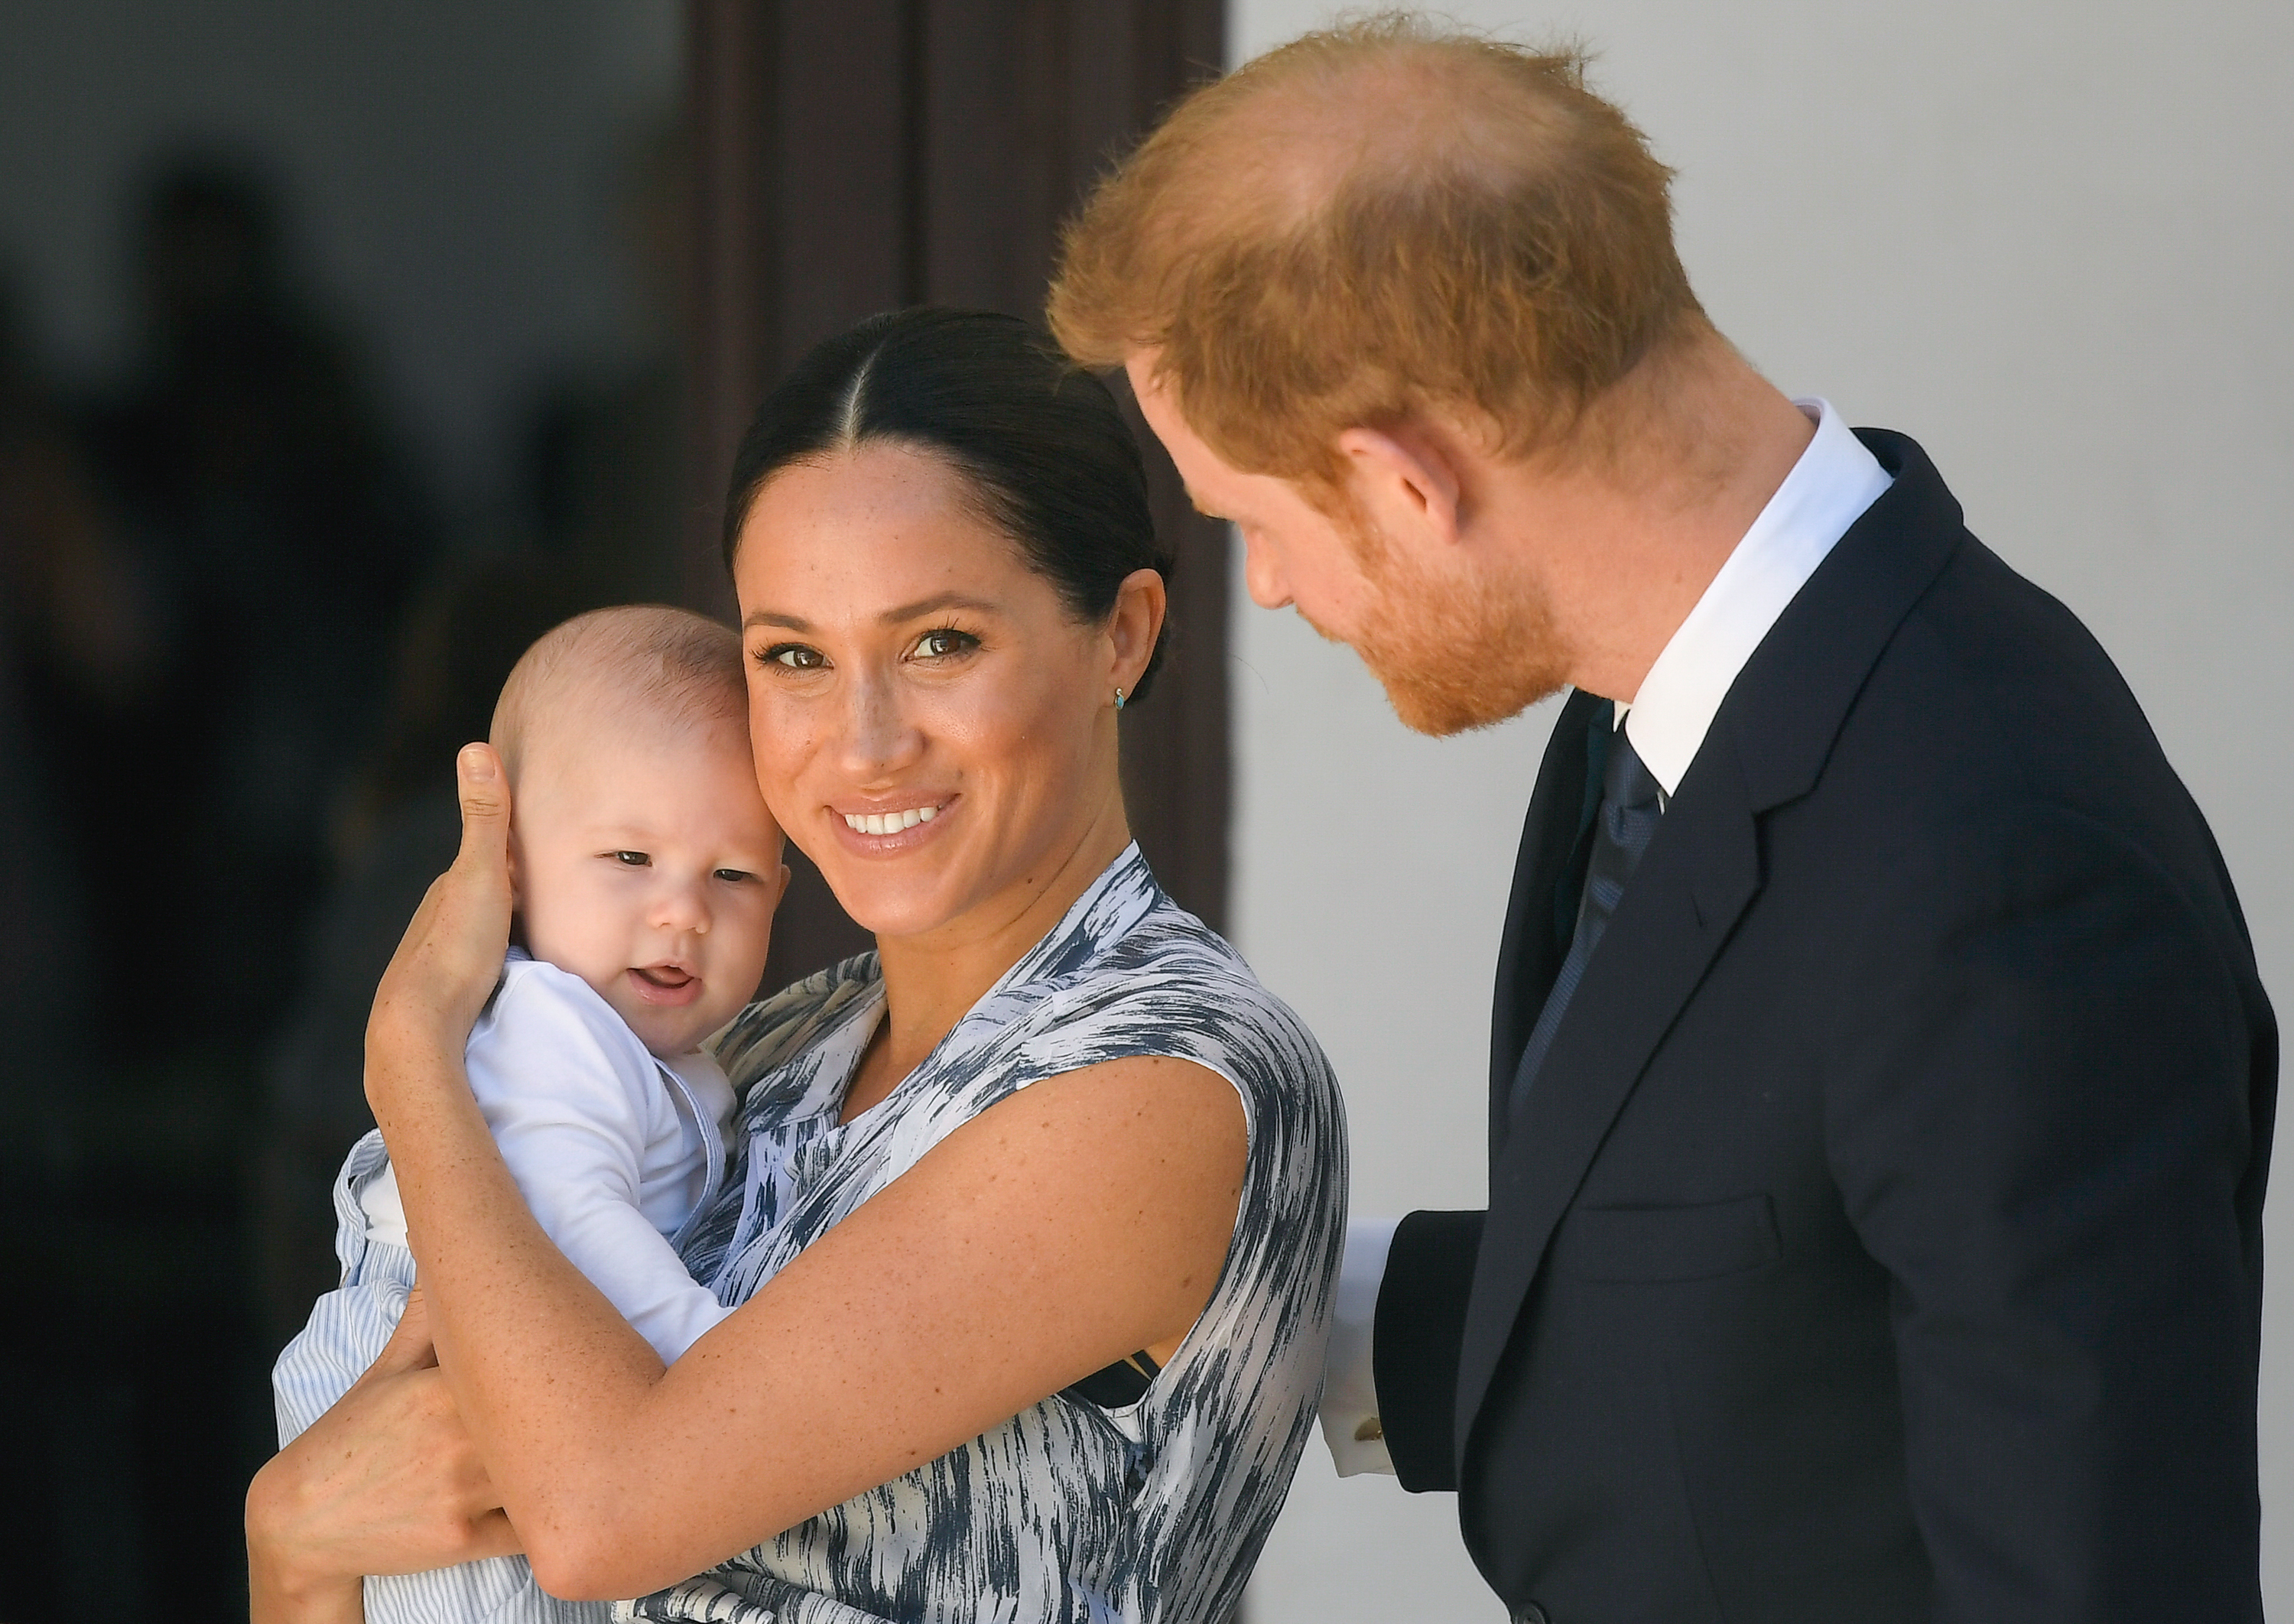 Meghan Markle and Prince Harry with their son, Archie, during their royal tour of South Africa on September 25, 2019 in Cape Town, South Africa | Source: Getty Images